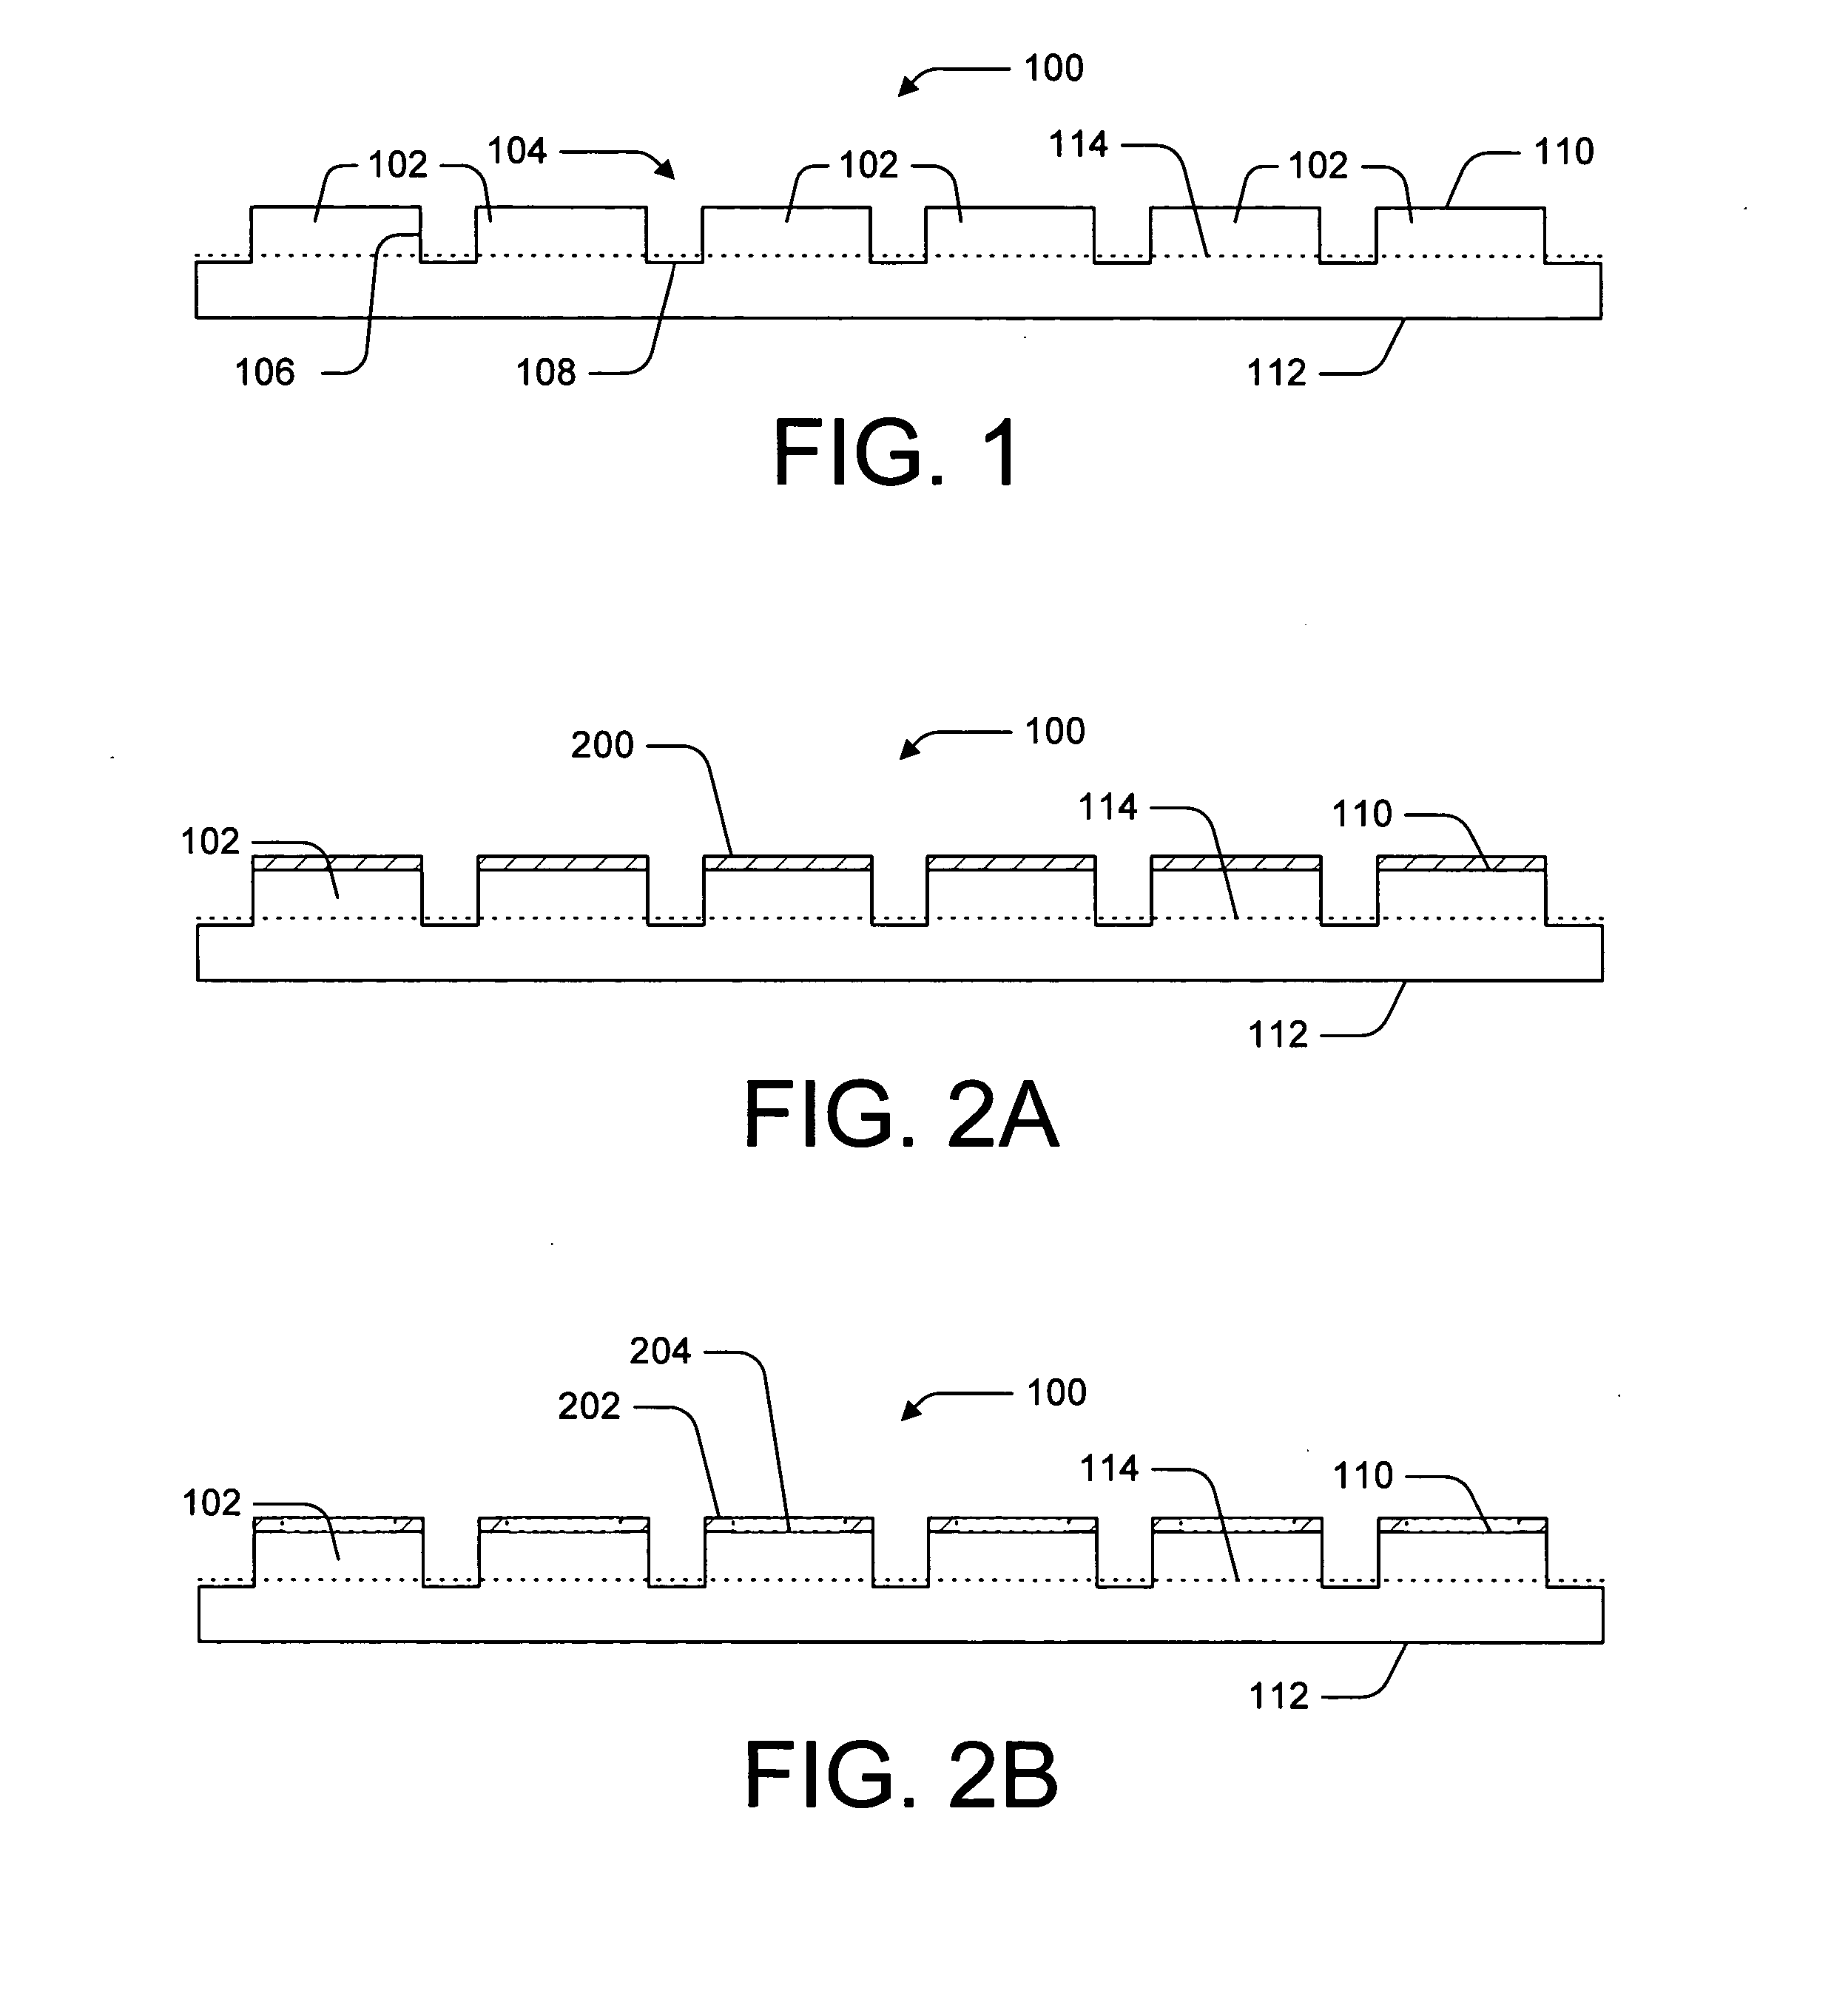 Method for mounting protective covers over image capture devices and devices manufactured thereby